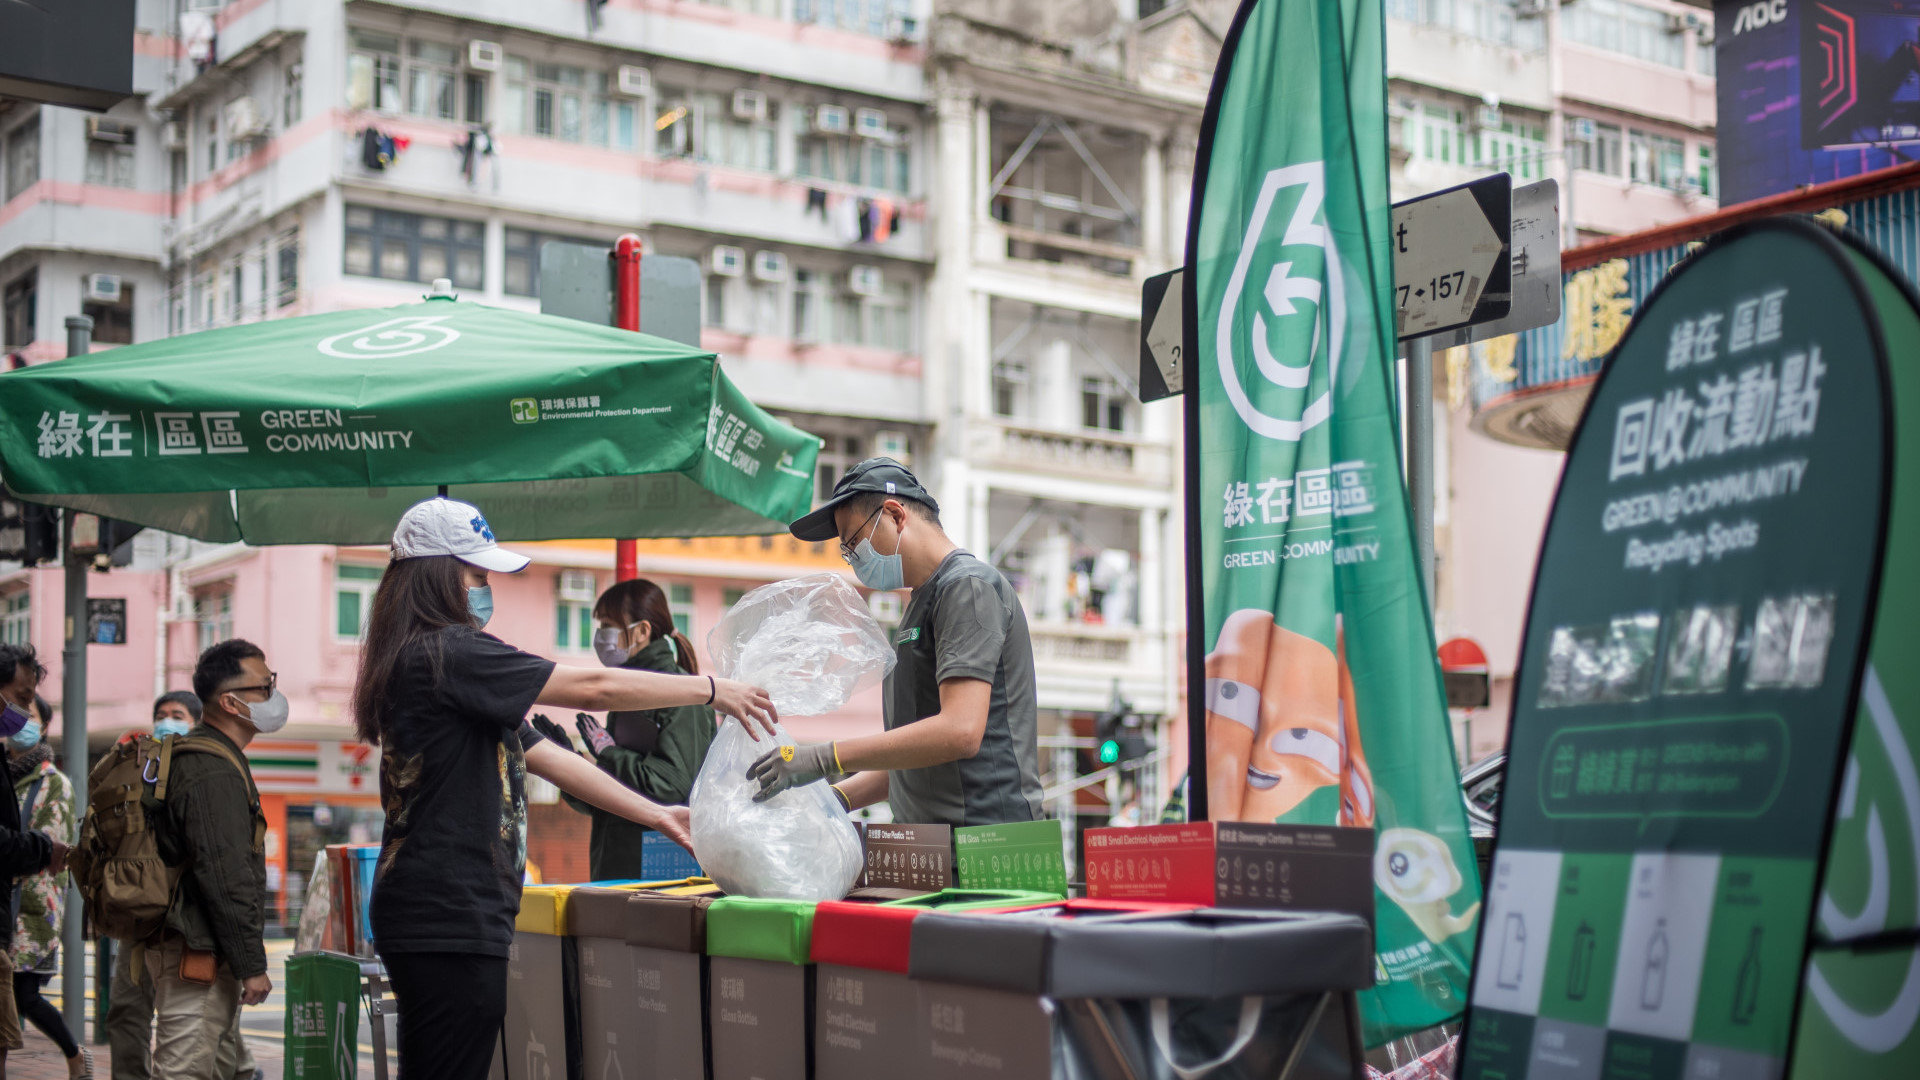 Members of public in difference age groups are practicing waste separation and recycling